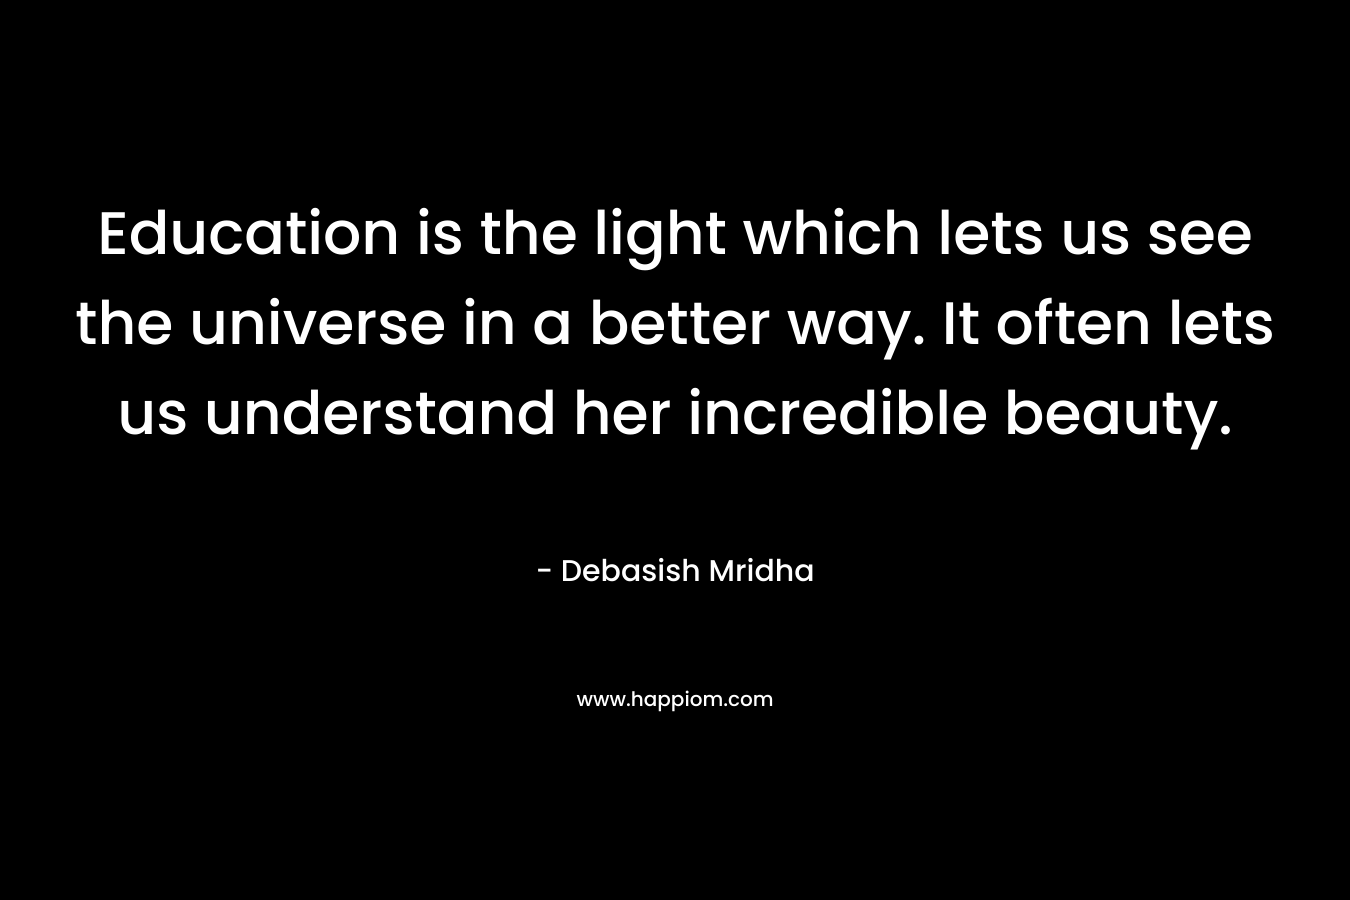 Education is the light which lets us see the universe in a better way. It often lets us understand her incredible beauty.